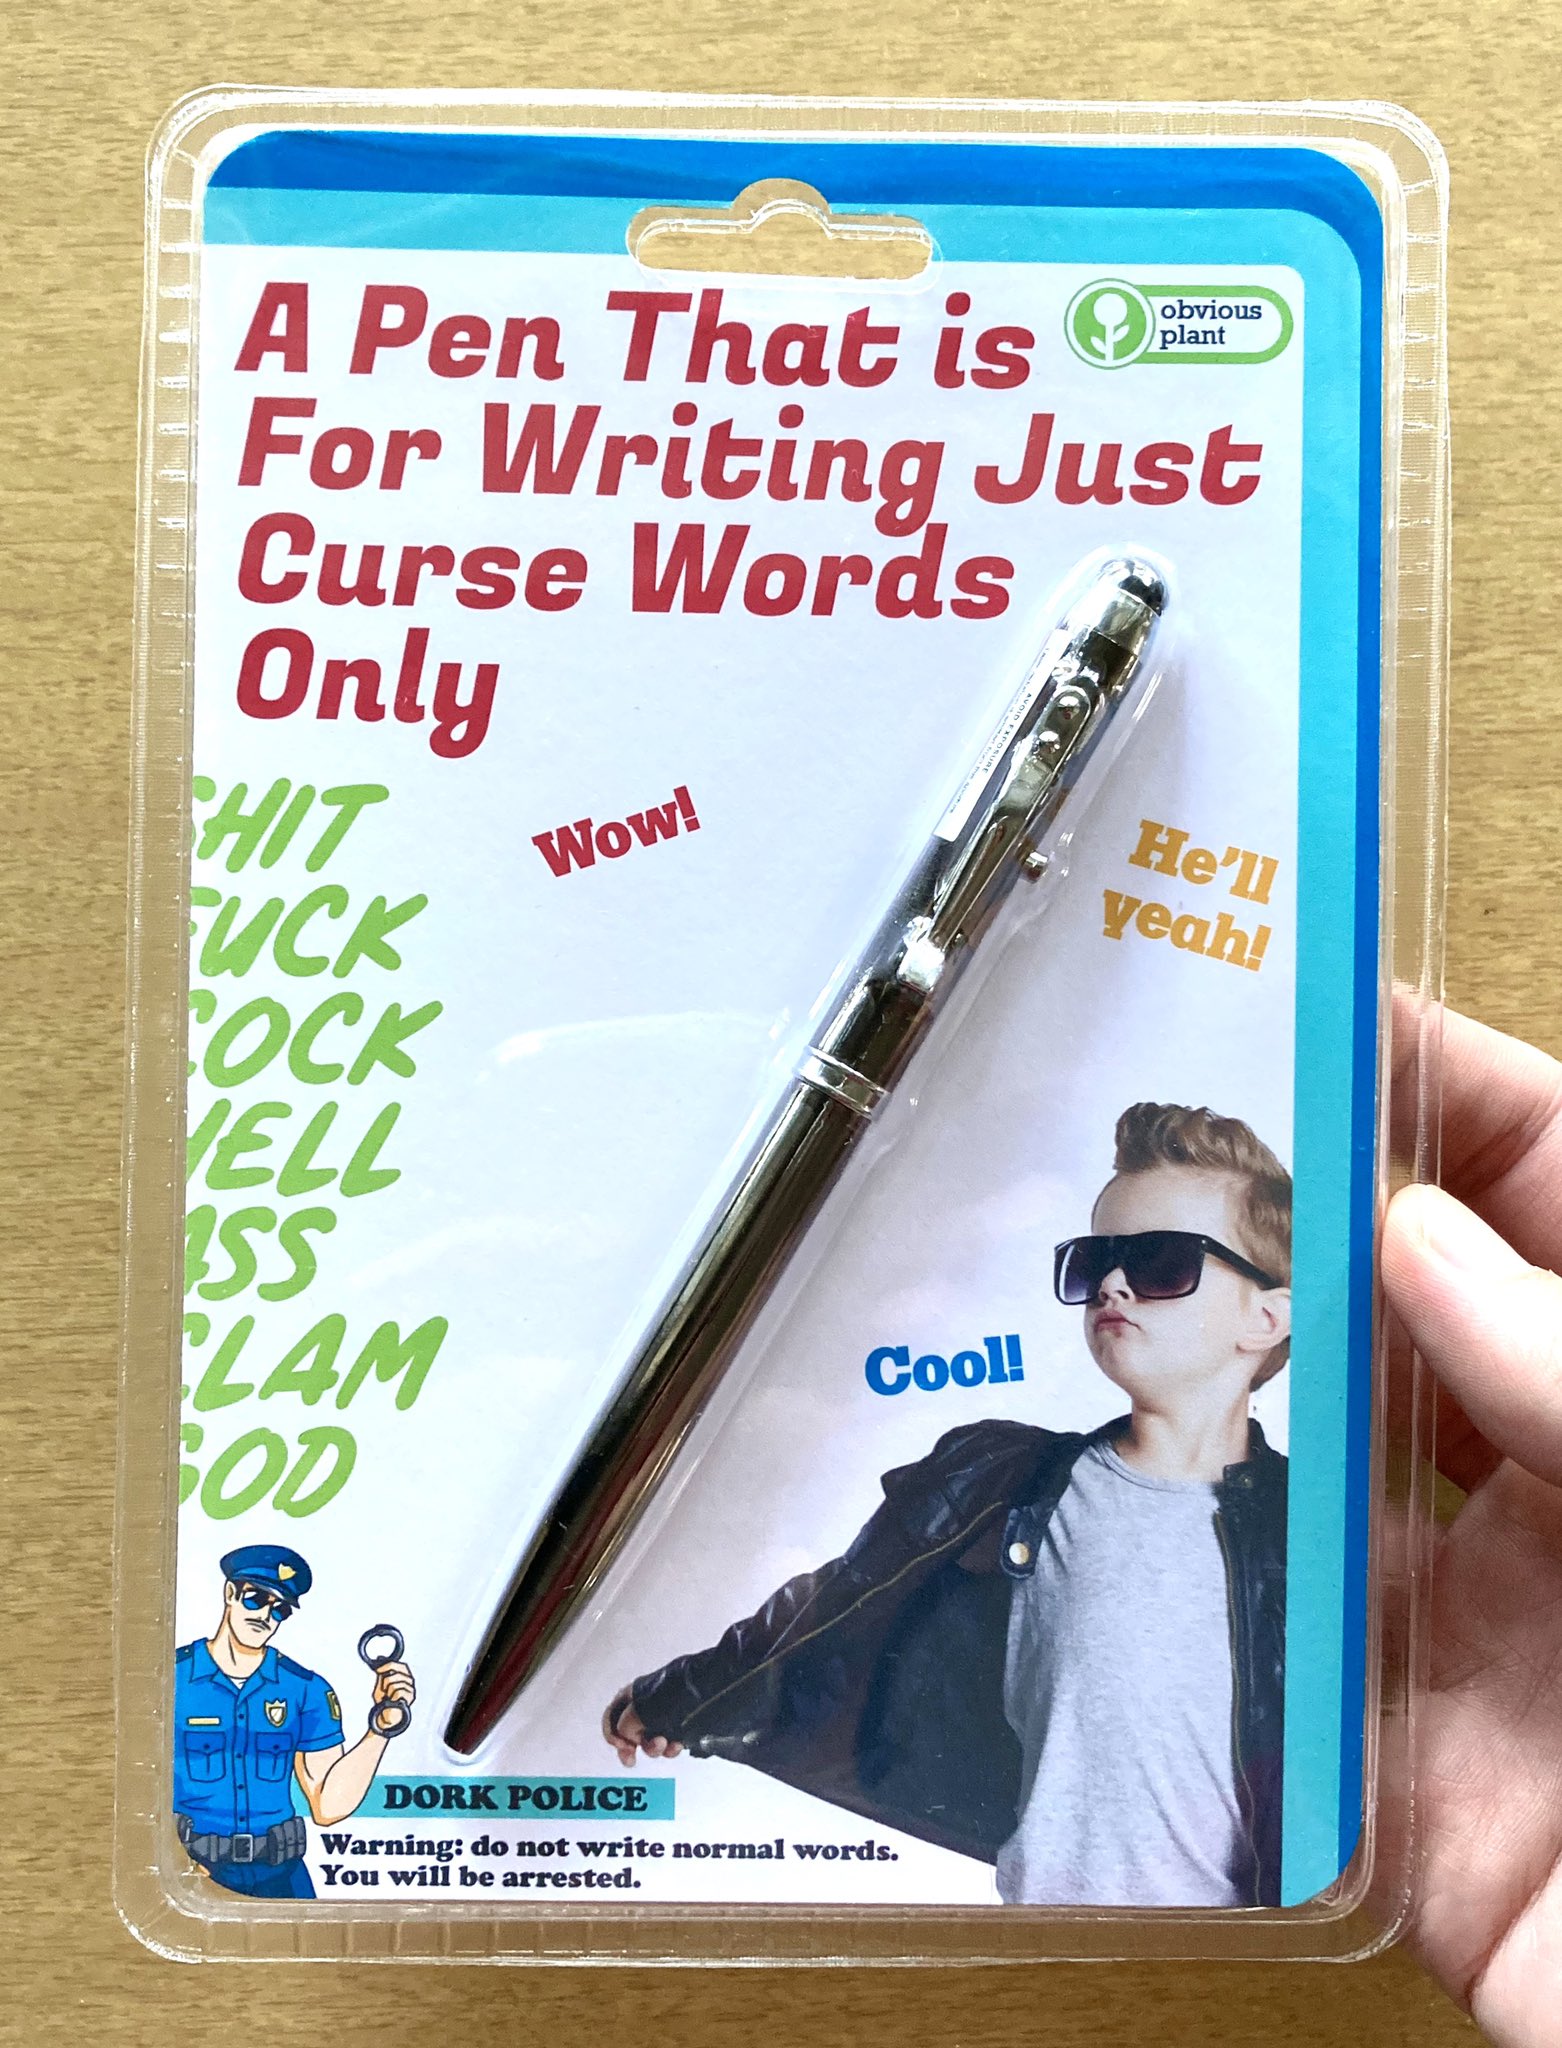 obvious plant on X: A Pen That is For Writing Just Curse Words